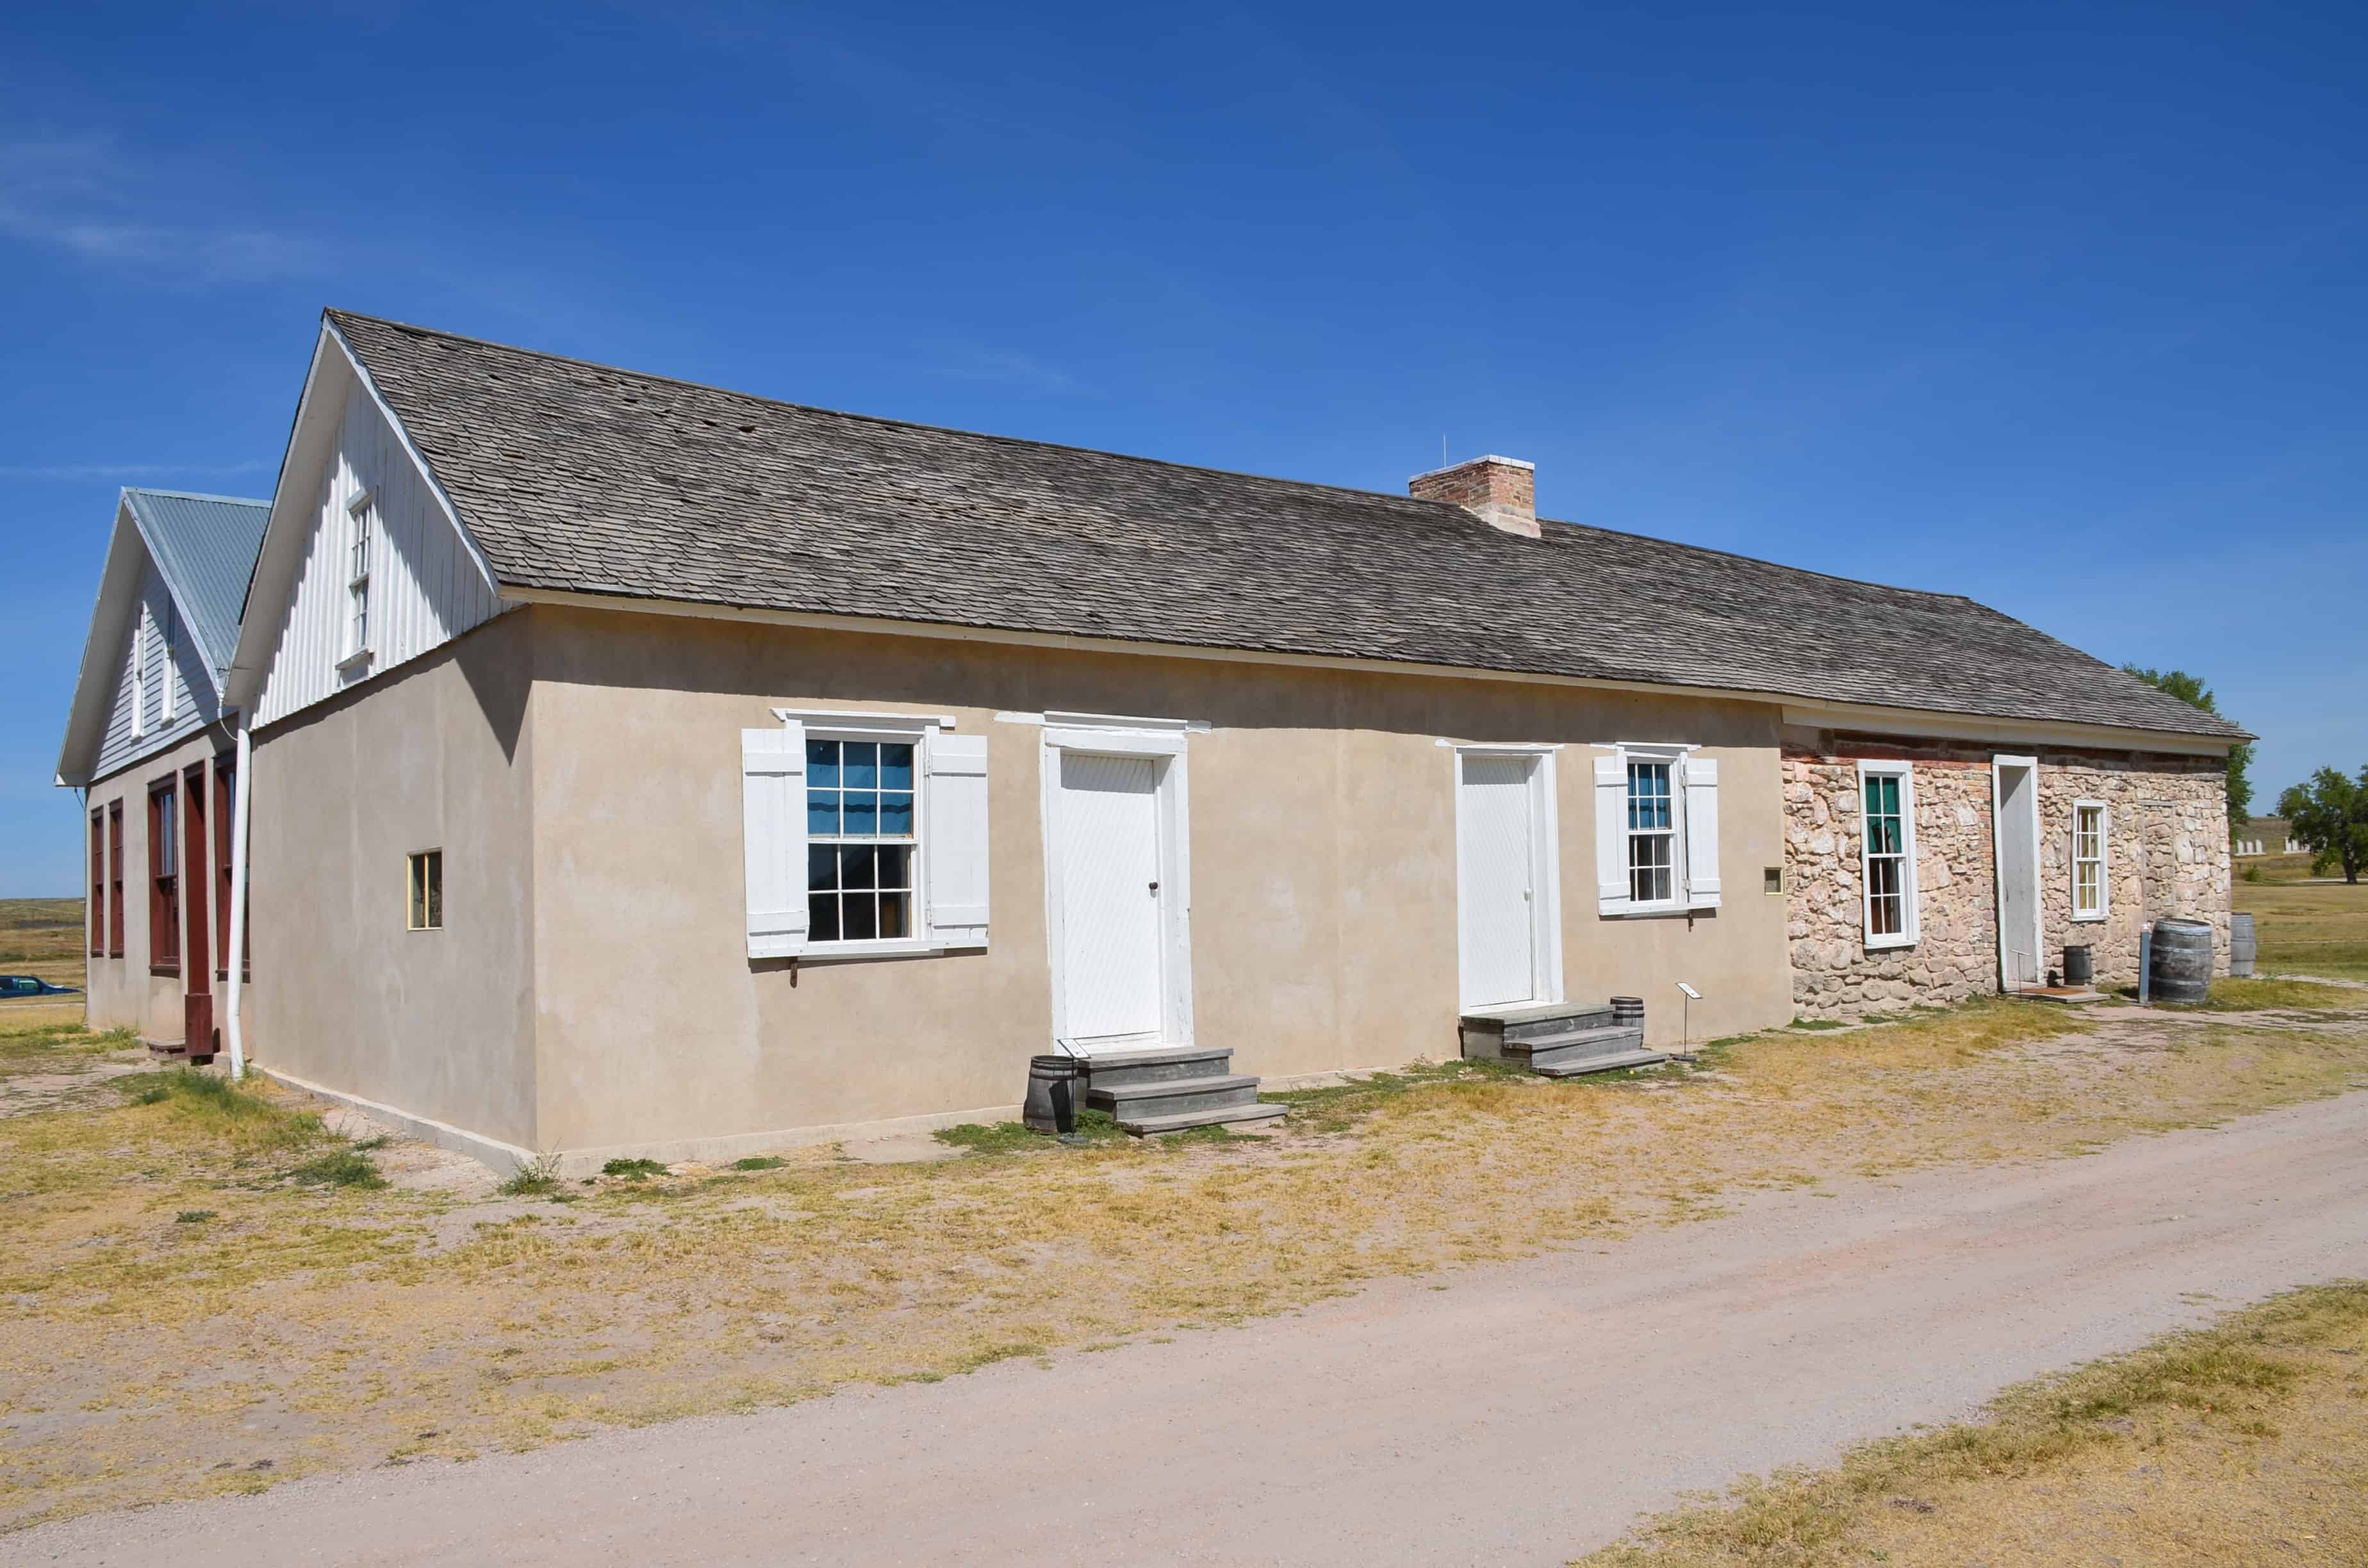 Post trader's store & post office at Fort Laramie National Historic Site in Wyoming